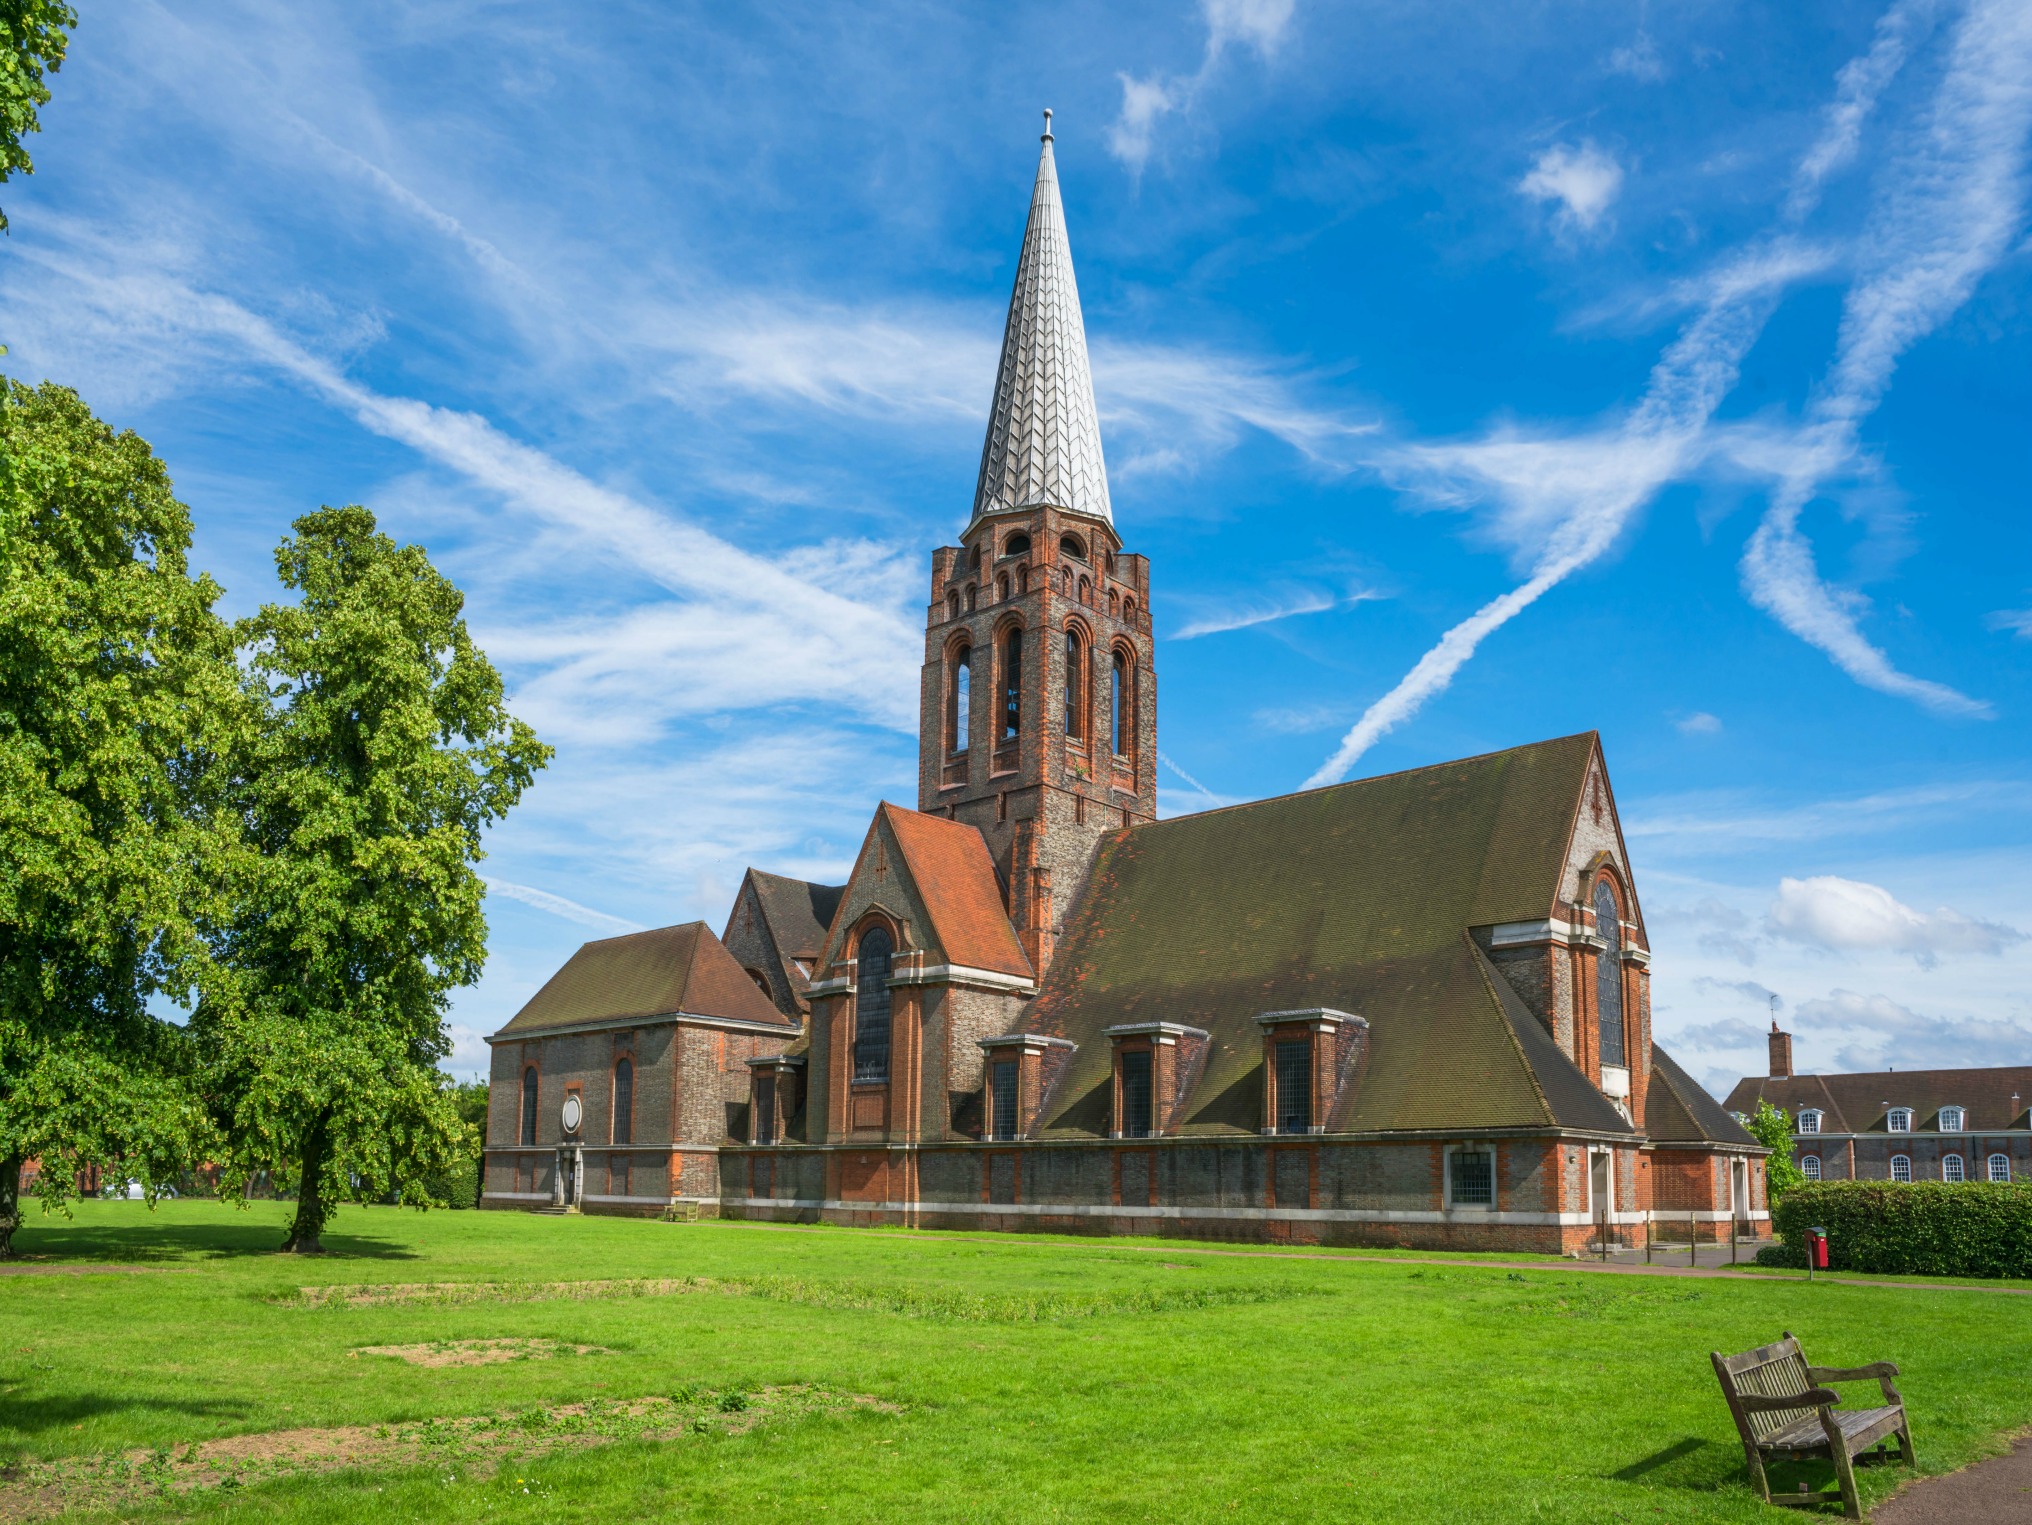 The Old Brick Church is within walking distance of exquisite Hampstead Garden Suburb property